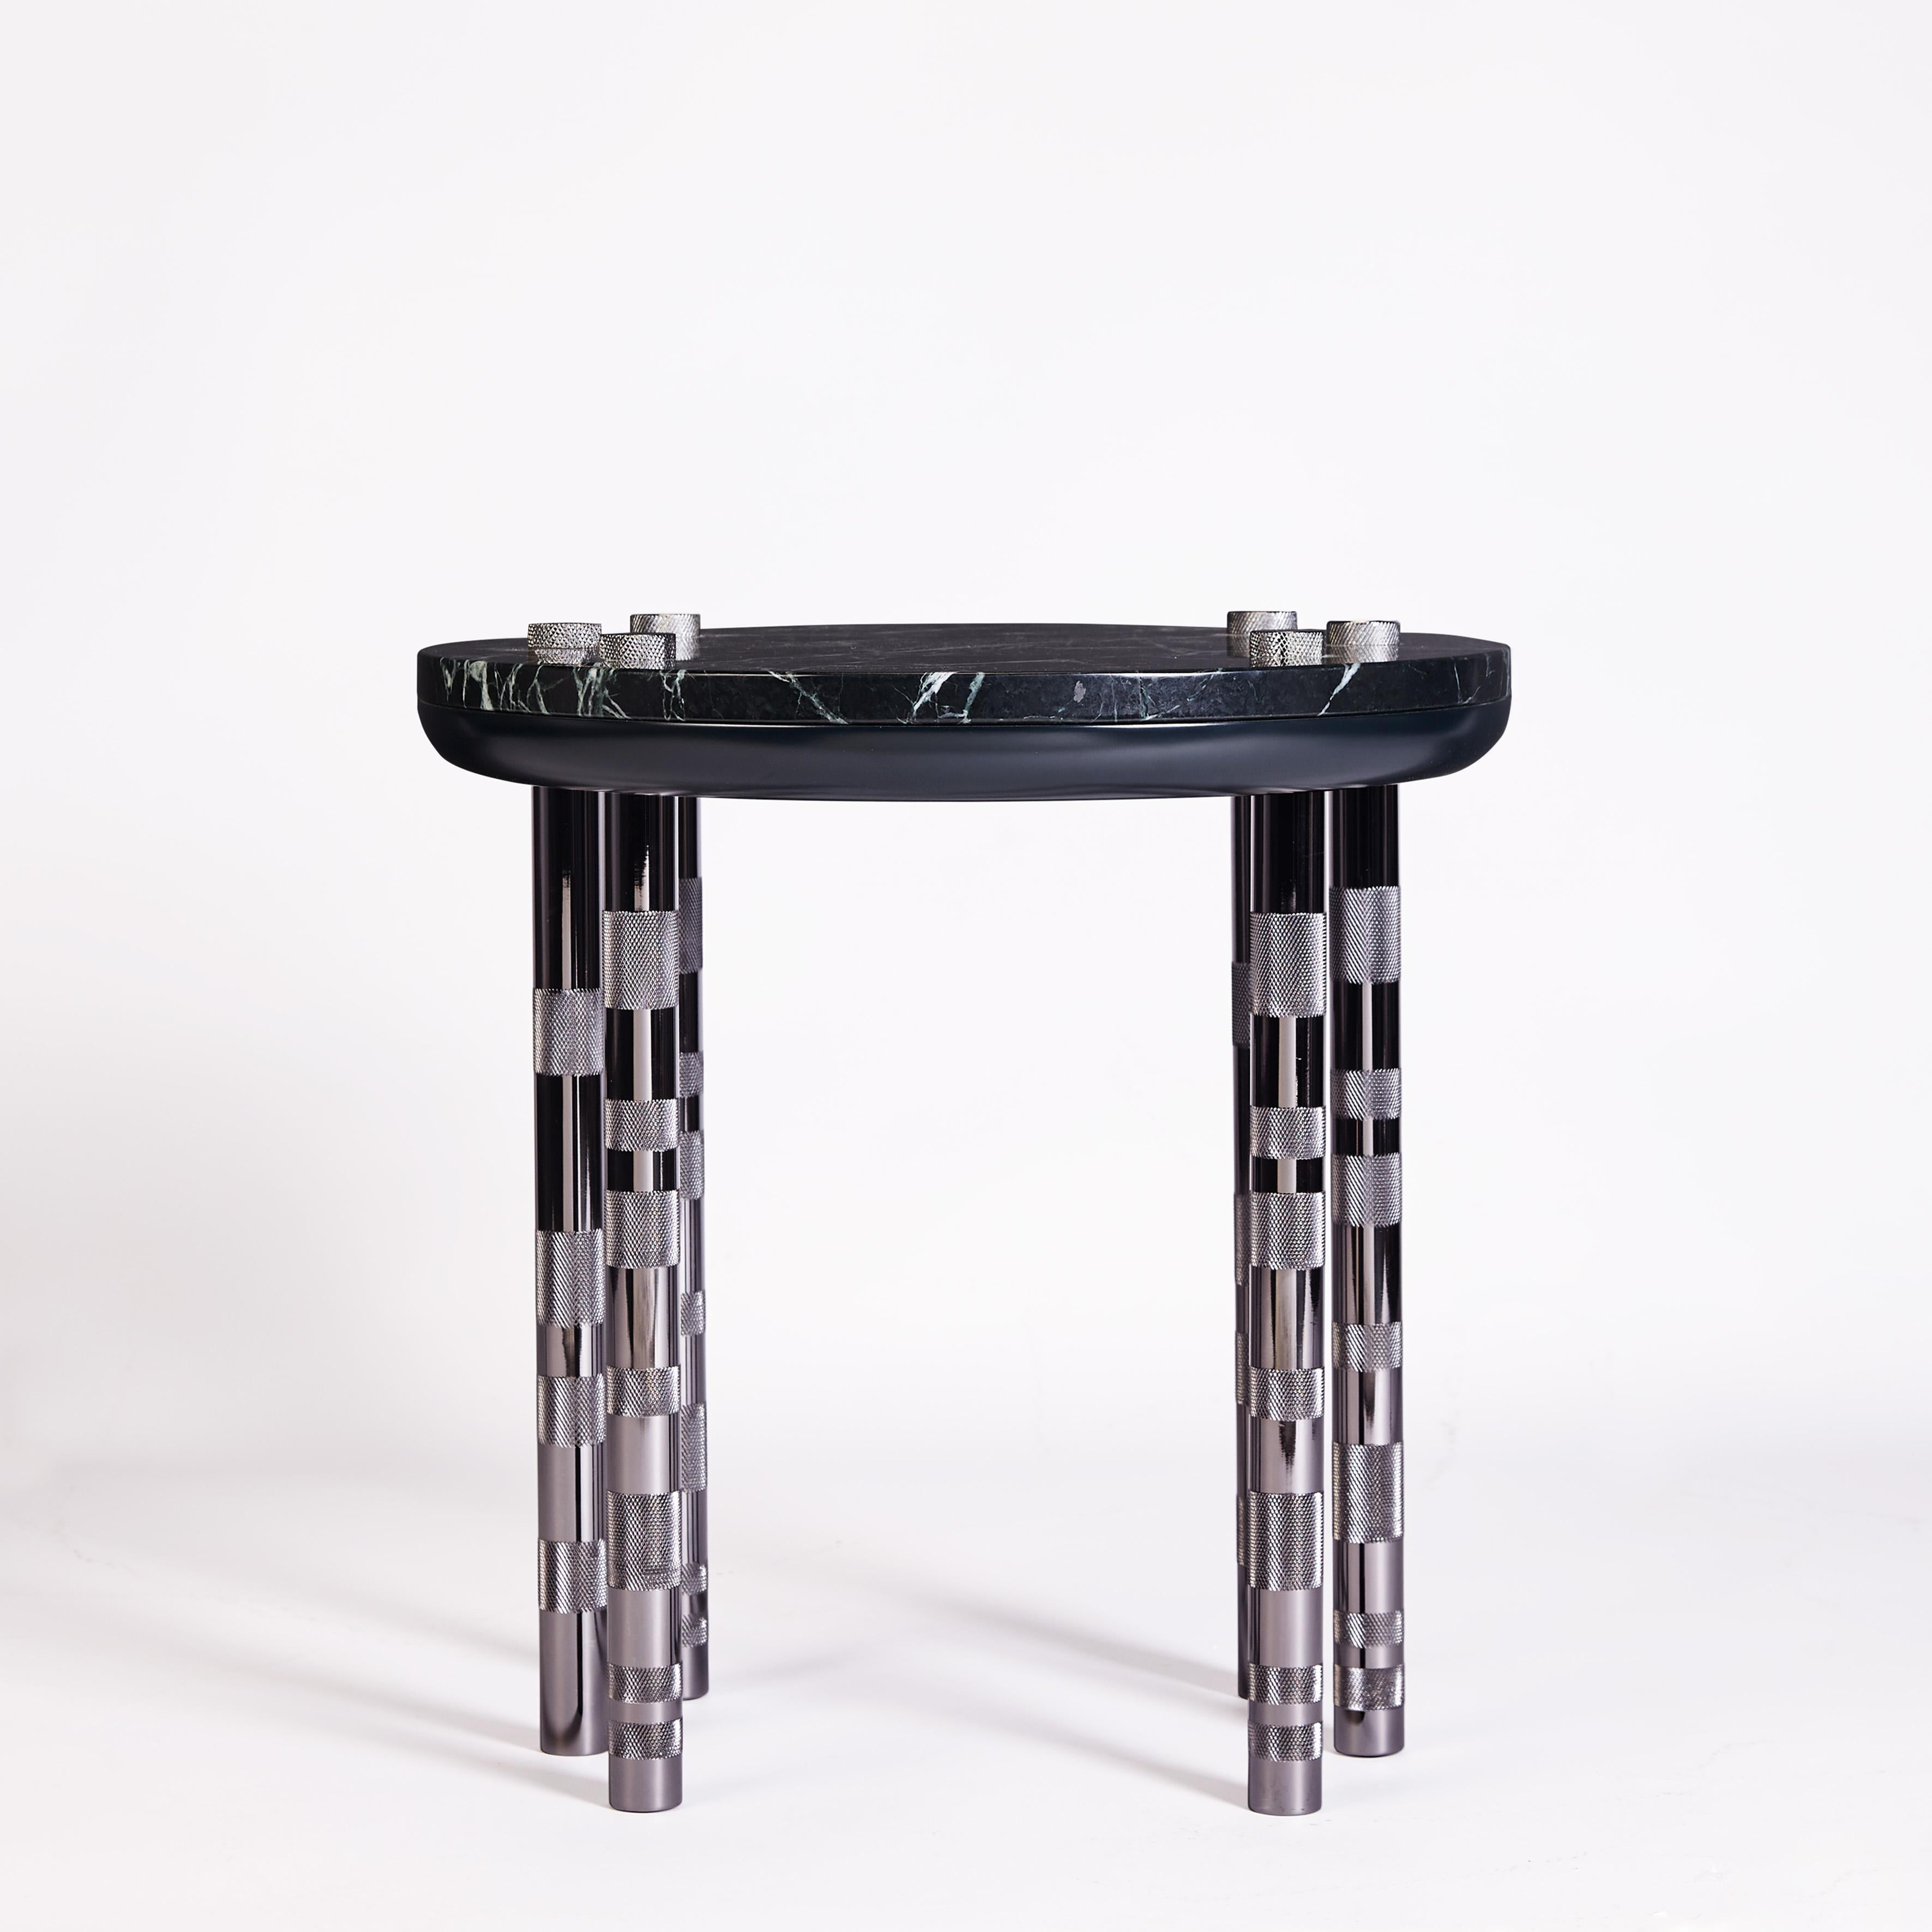 Portuguese Ipanema Nickel Plated Side Table, Handcrafted in Portugal by Duistt